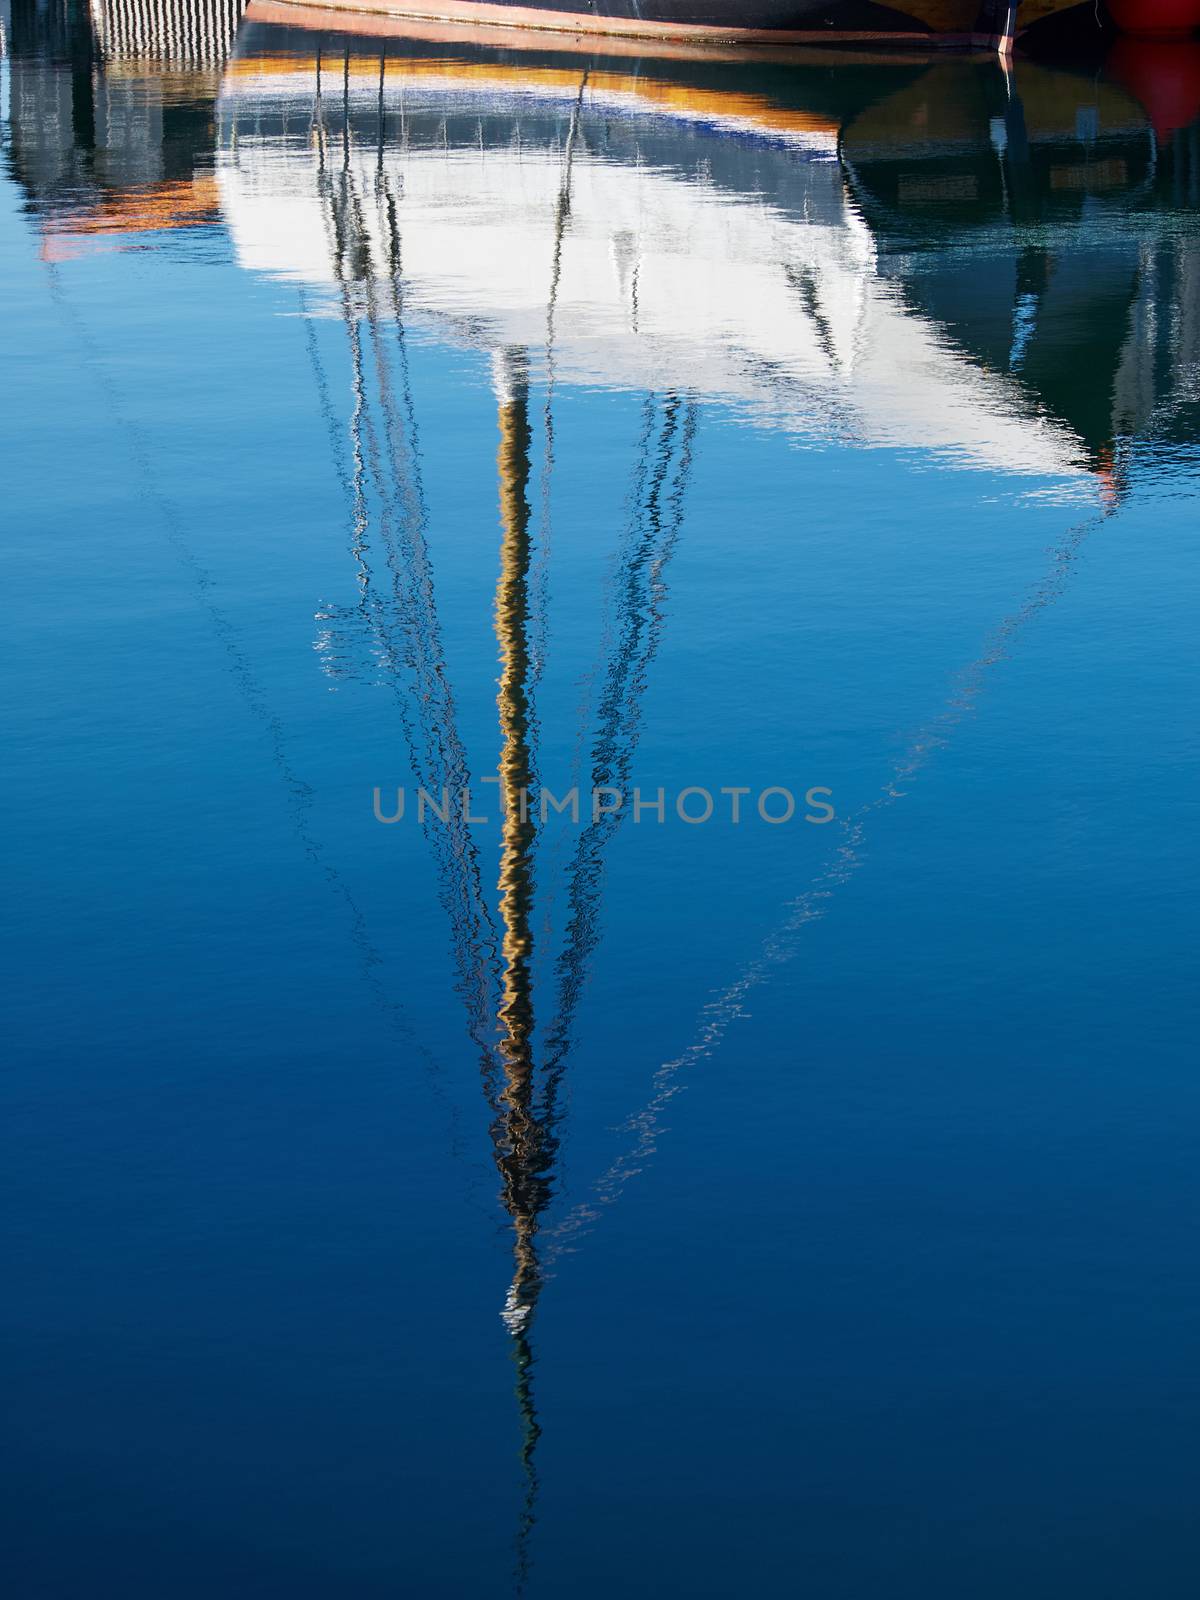 Reflection of a yacht in the water by Ronyzmbow